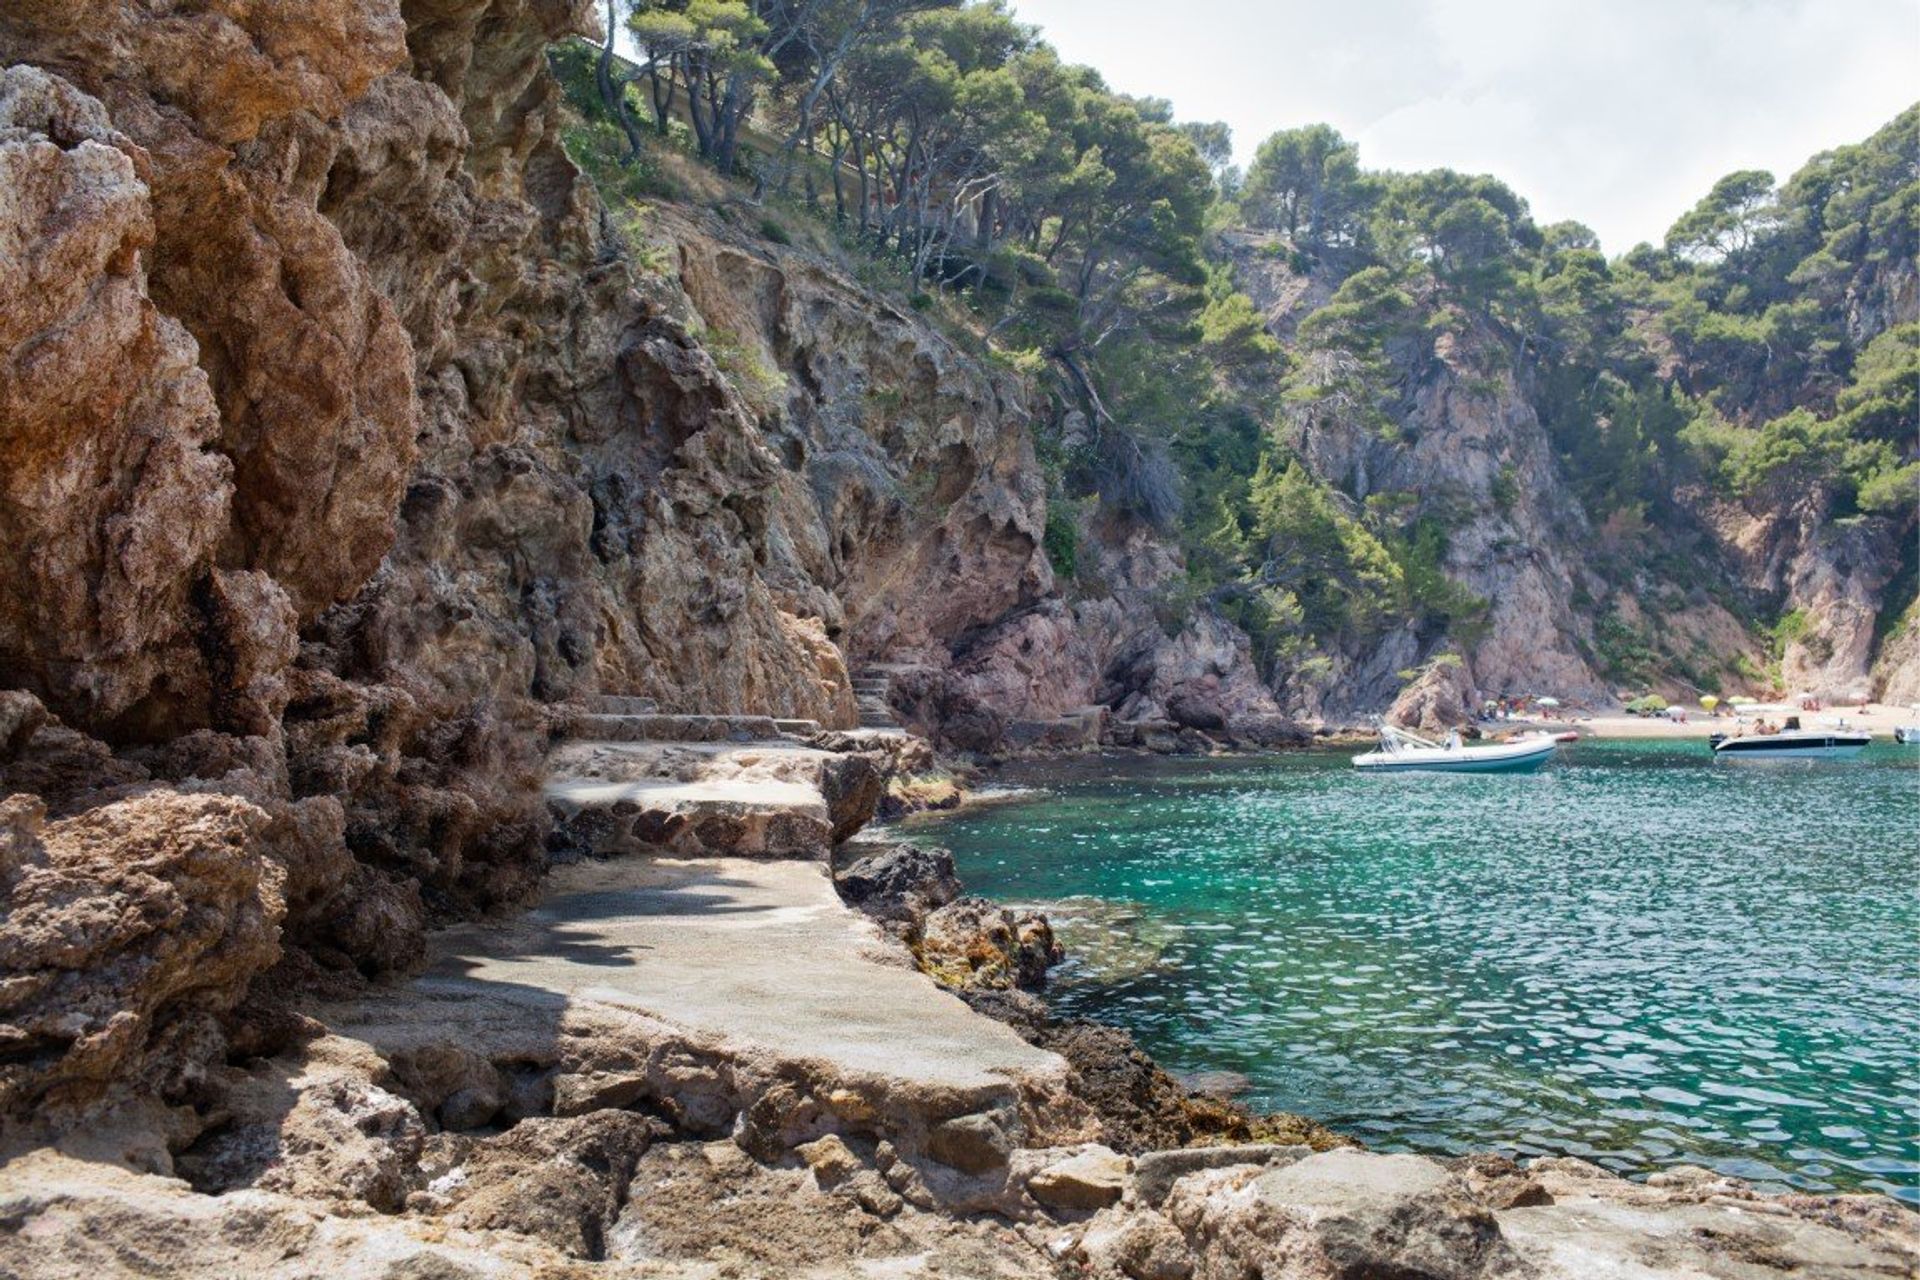 The beautiful unspoiled beach of Cala Futedera, 6km from Tossa de Mar, next to the road that connects it to Sant Feliu